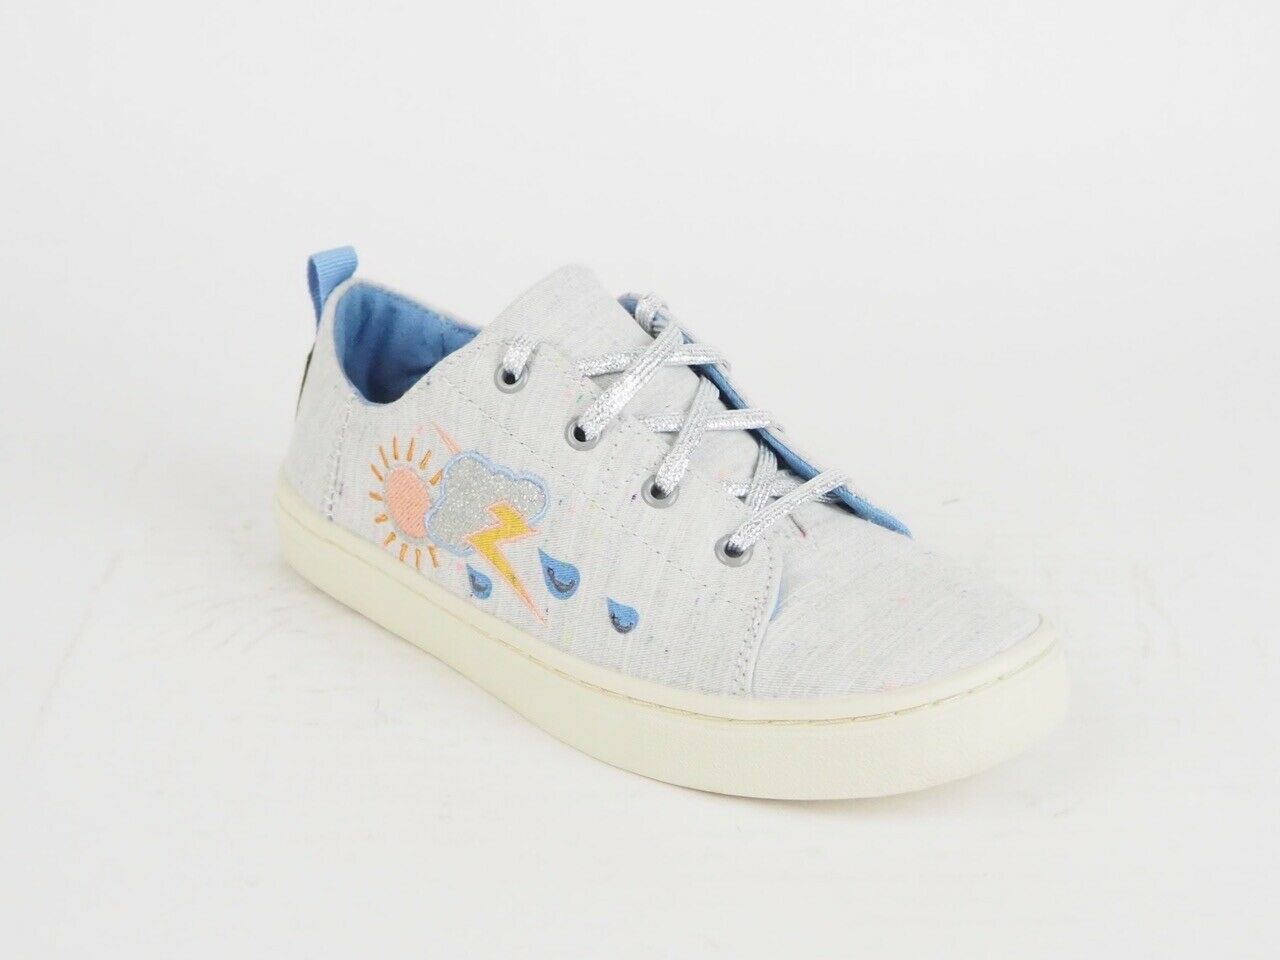 Girls Toms Lenny Grey Drizzly Weather Textile Flats Lace Up Trainers Uk K12.5 - London Top Style